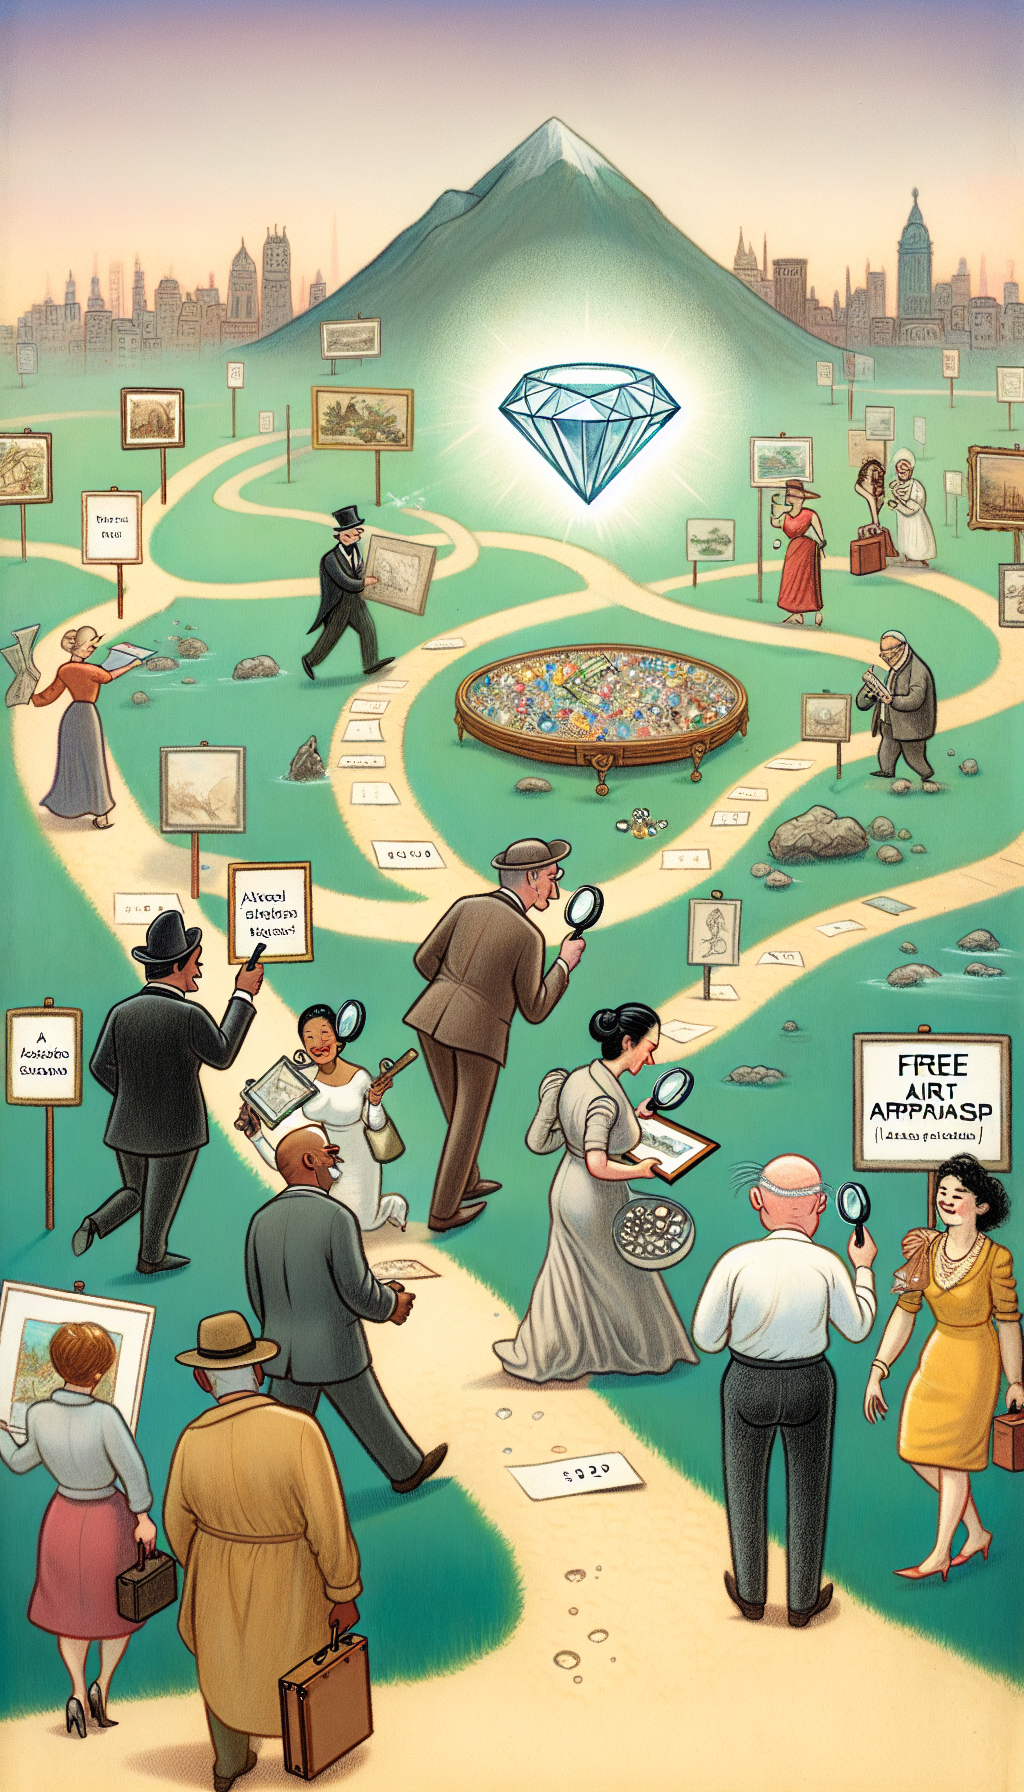 A whimsical illustration features a treasure map with local landmarks, leading to a sparkling diamond labeled "Free Art Appraisal." The diverse paths, drawn in distinct styles—from watercolor to line art—converge at this point. Appraisers, depicted as friendly caricatures with magnifying glasses and jeweler's loupes, eagerly examine artworks brought by a community of artists.